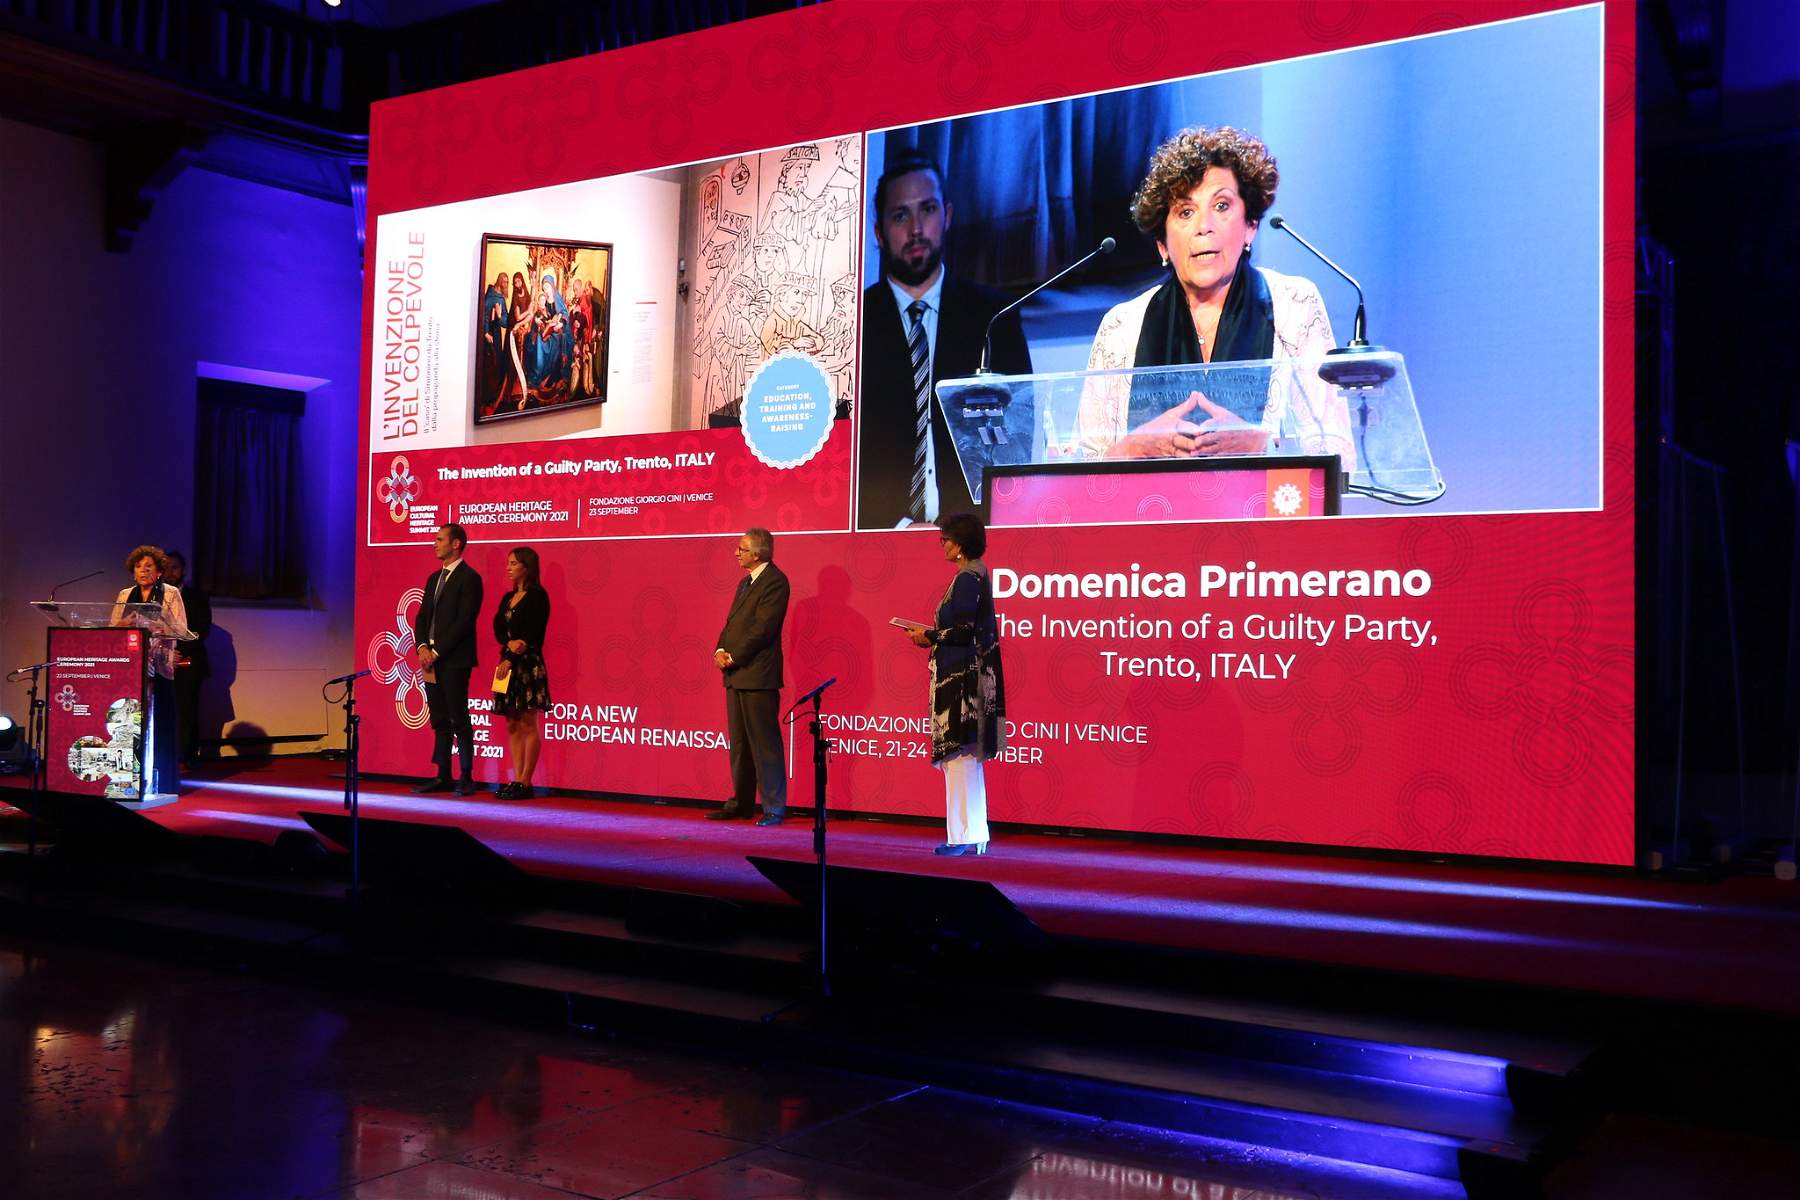 Italy's the best exhibition of the year: review of Simonino da Trento wins Europa Nostra Awards 